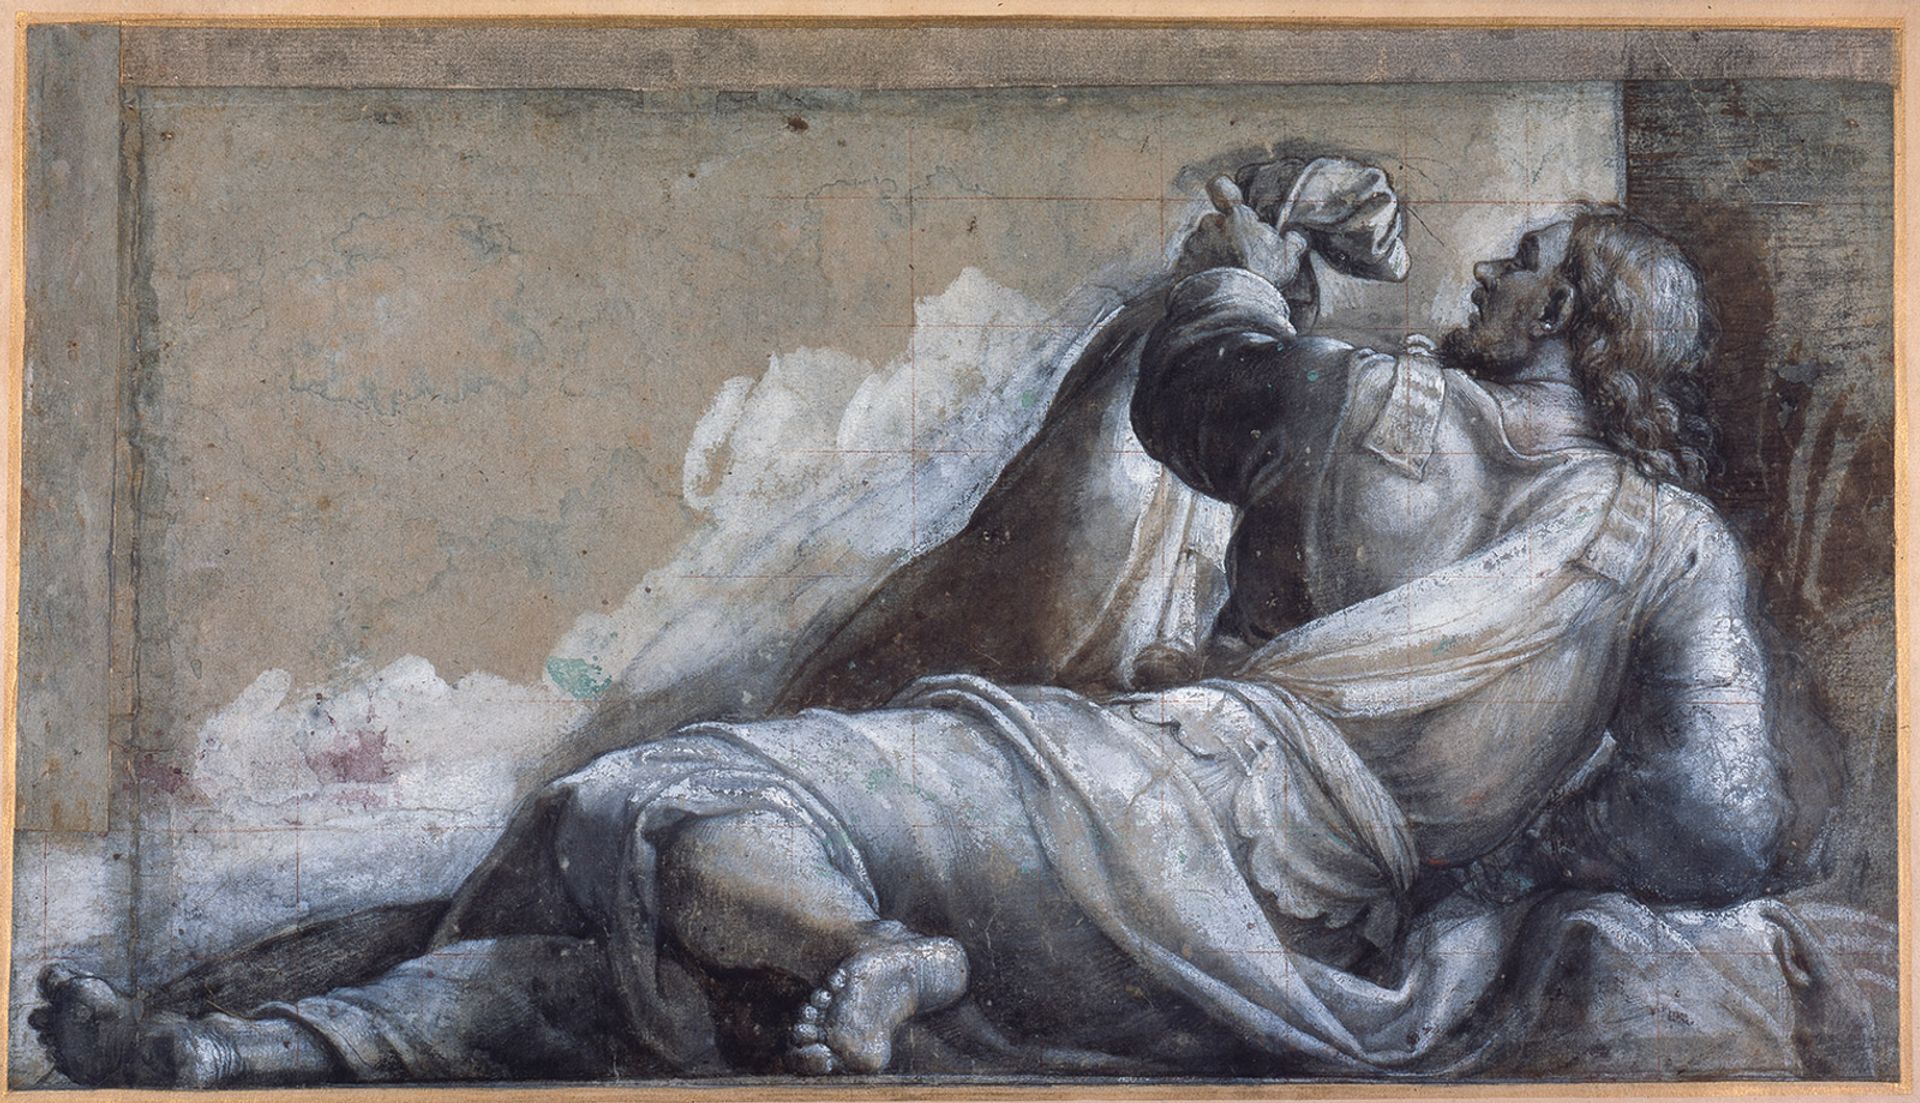 A Reclining Apostle (around 1516) by Sebastiano del Piombo is among the 59 loans from Chatsworth House Courtesy of Devonshire Collection, Chatsworth. Reproduced by permission of Chatsworth Settlement Trustees